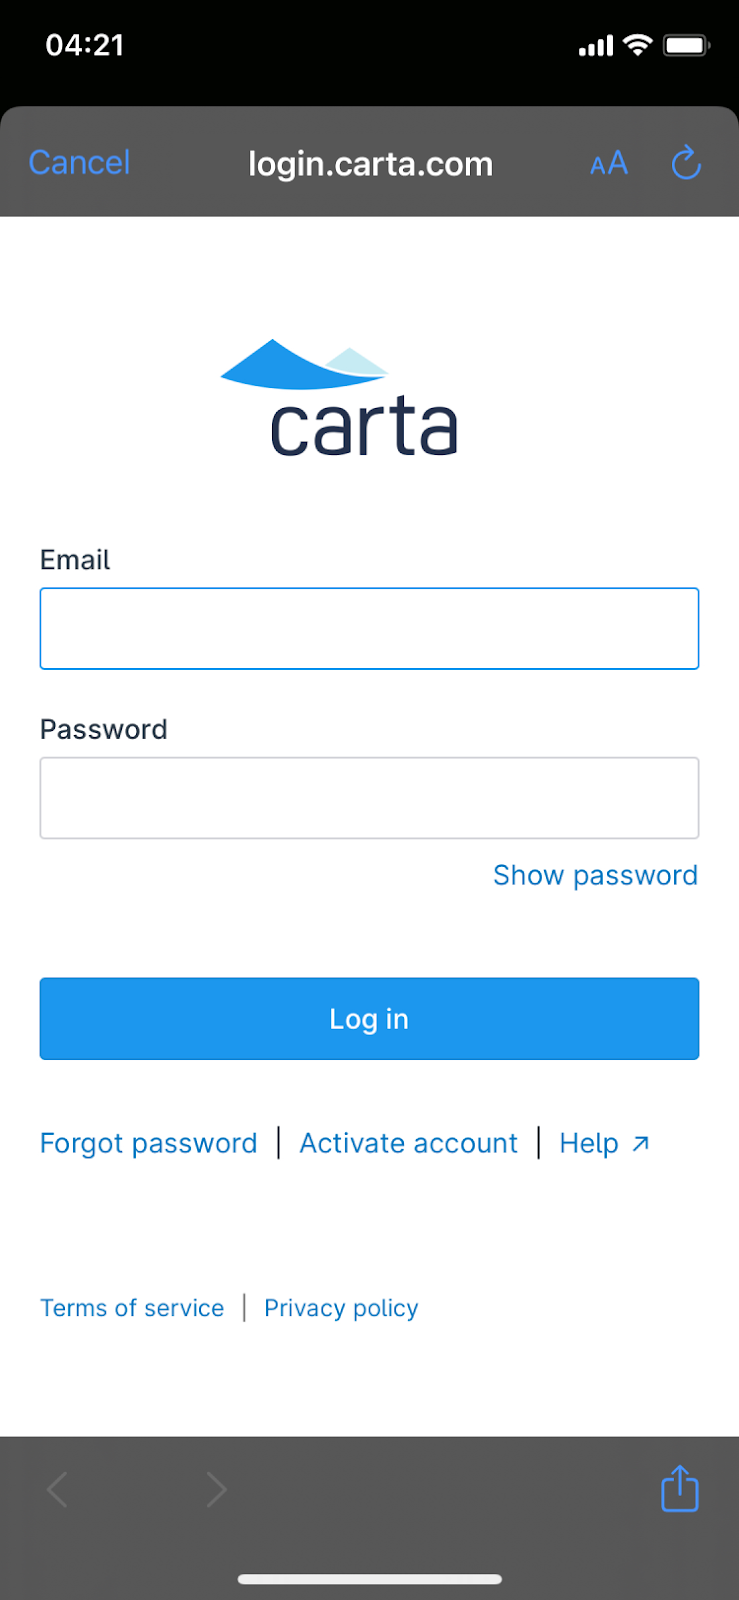 Logging in on the Carta Mobile App